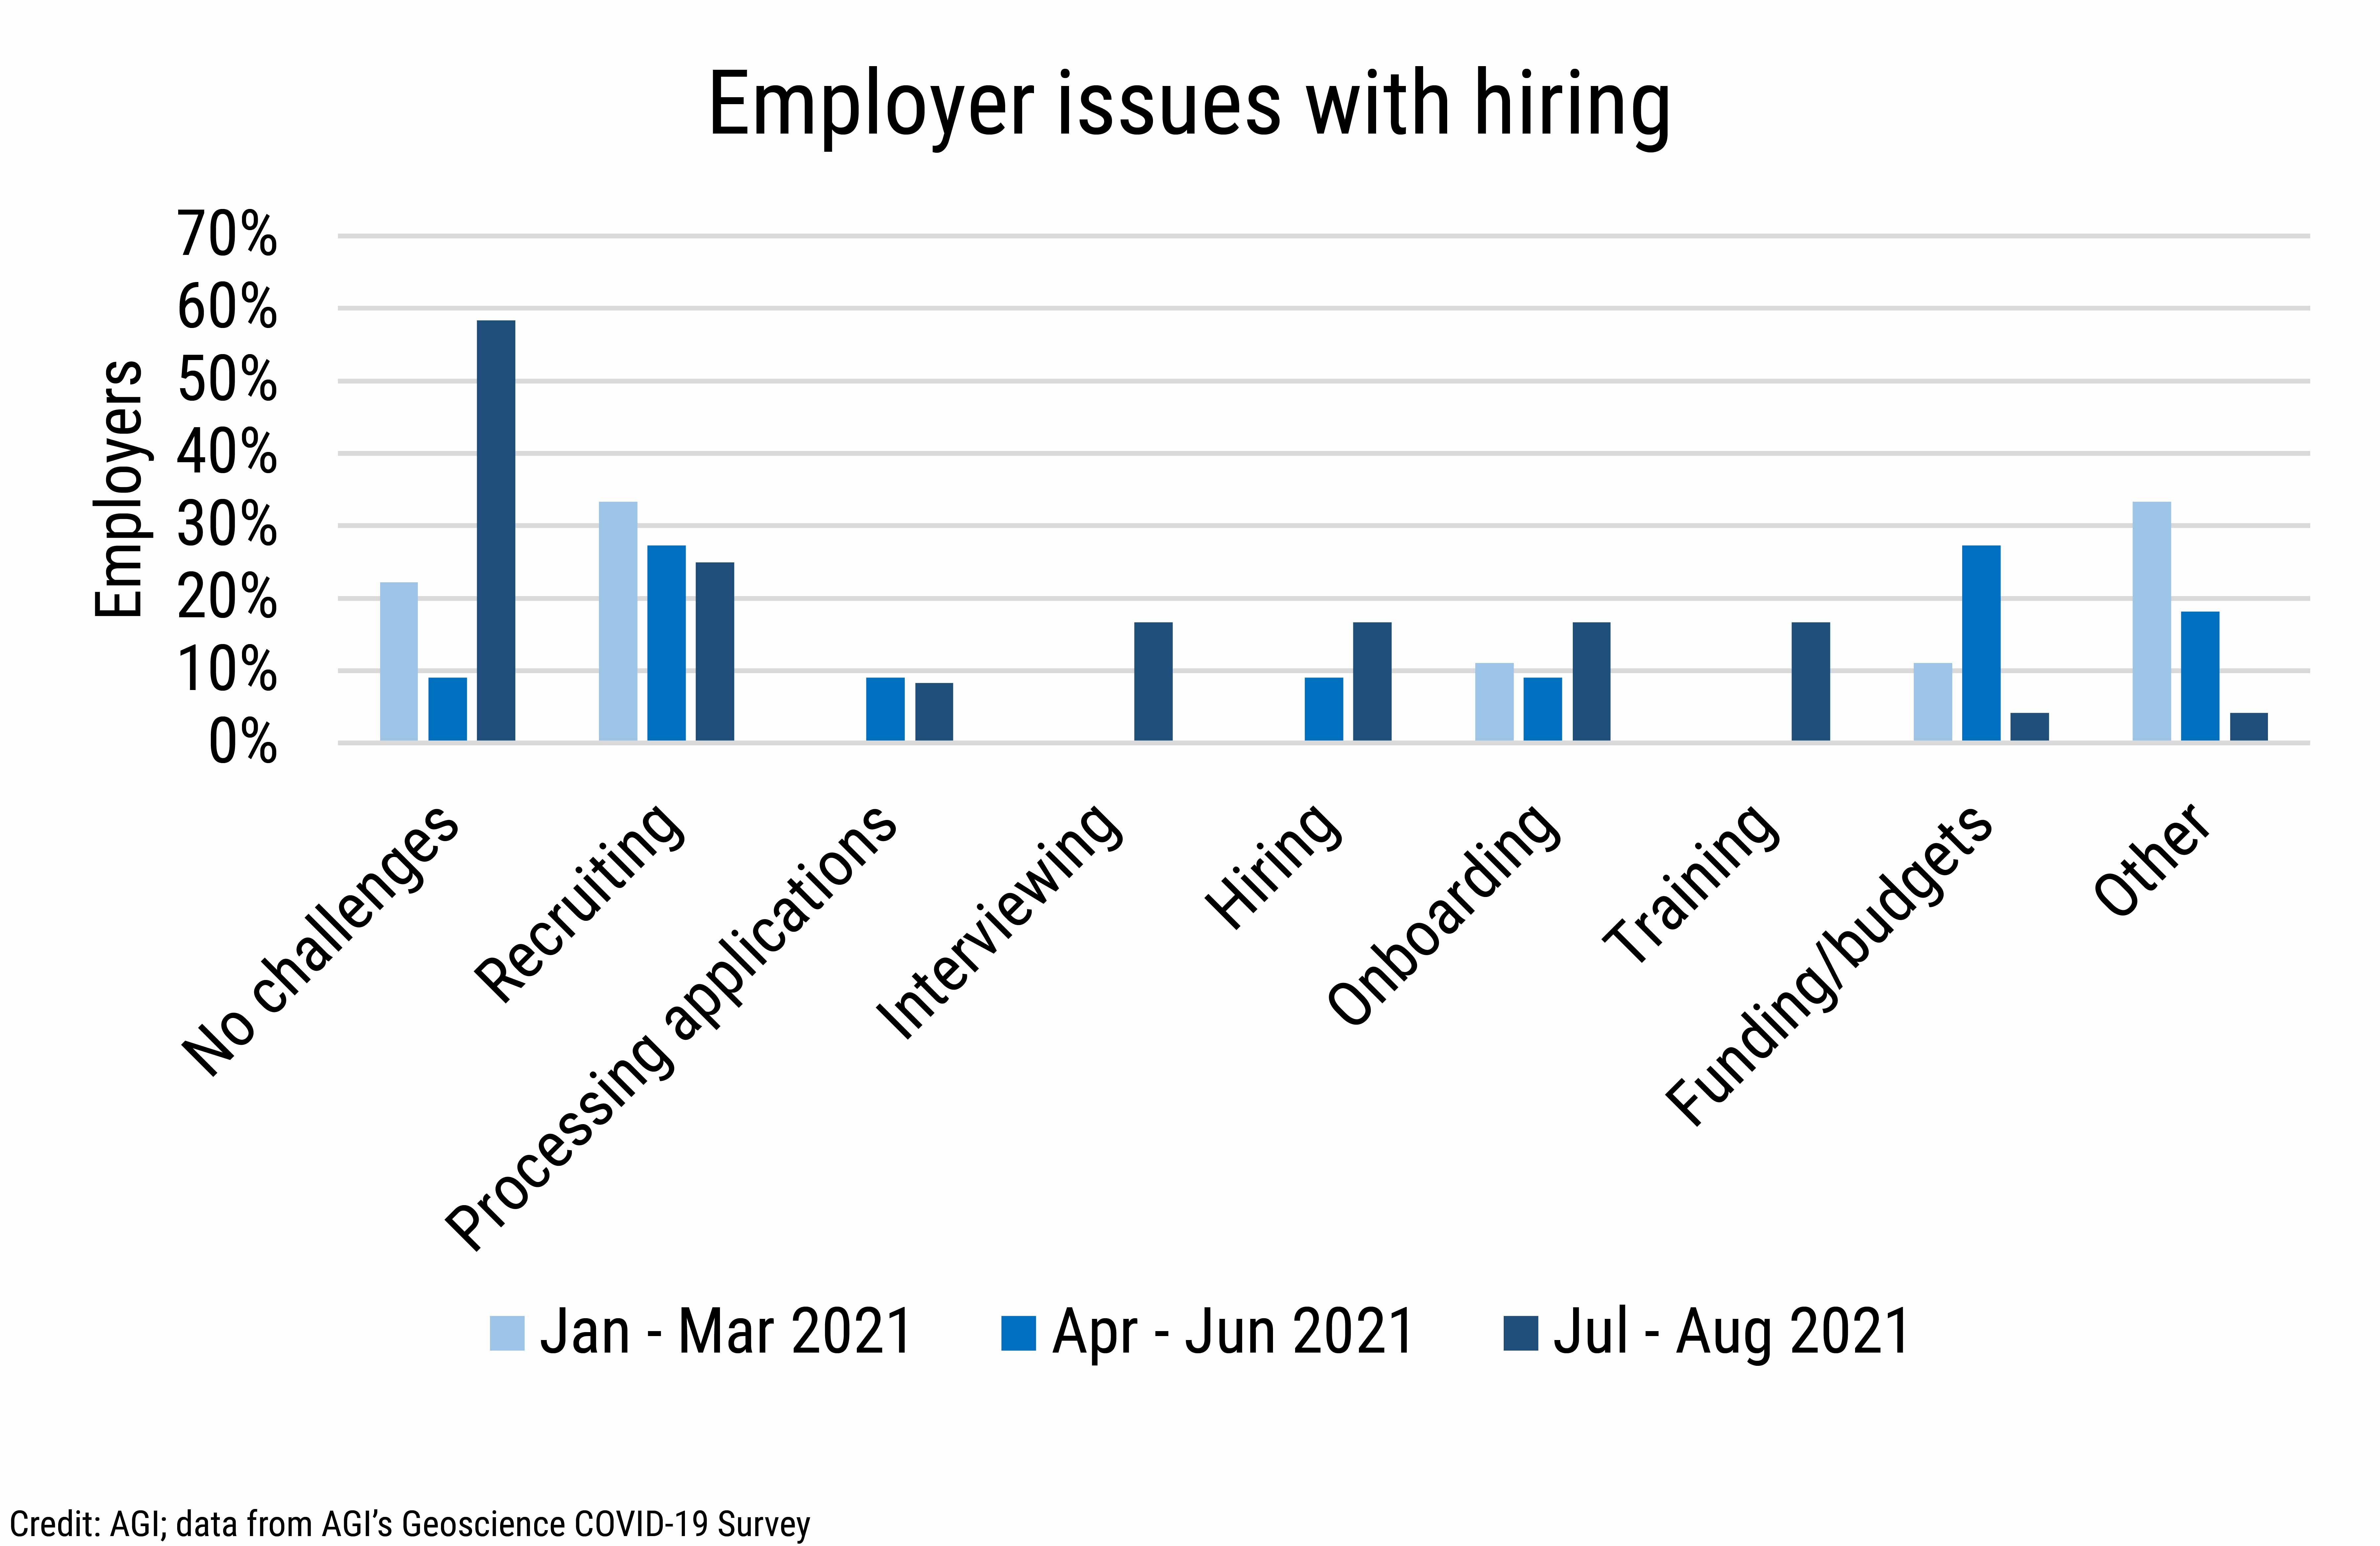 DB_2021-030 chart 09: Employer issues with hiring (Credit: AGI; data from AGI's Geoscience COVID-19 Survey)